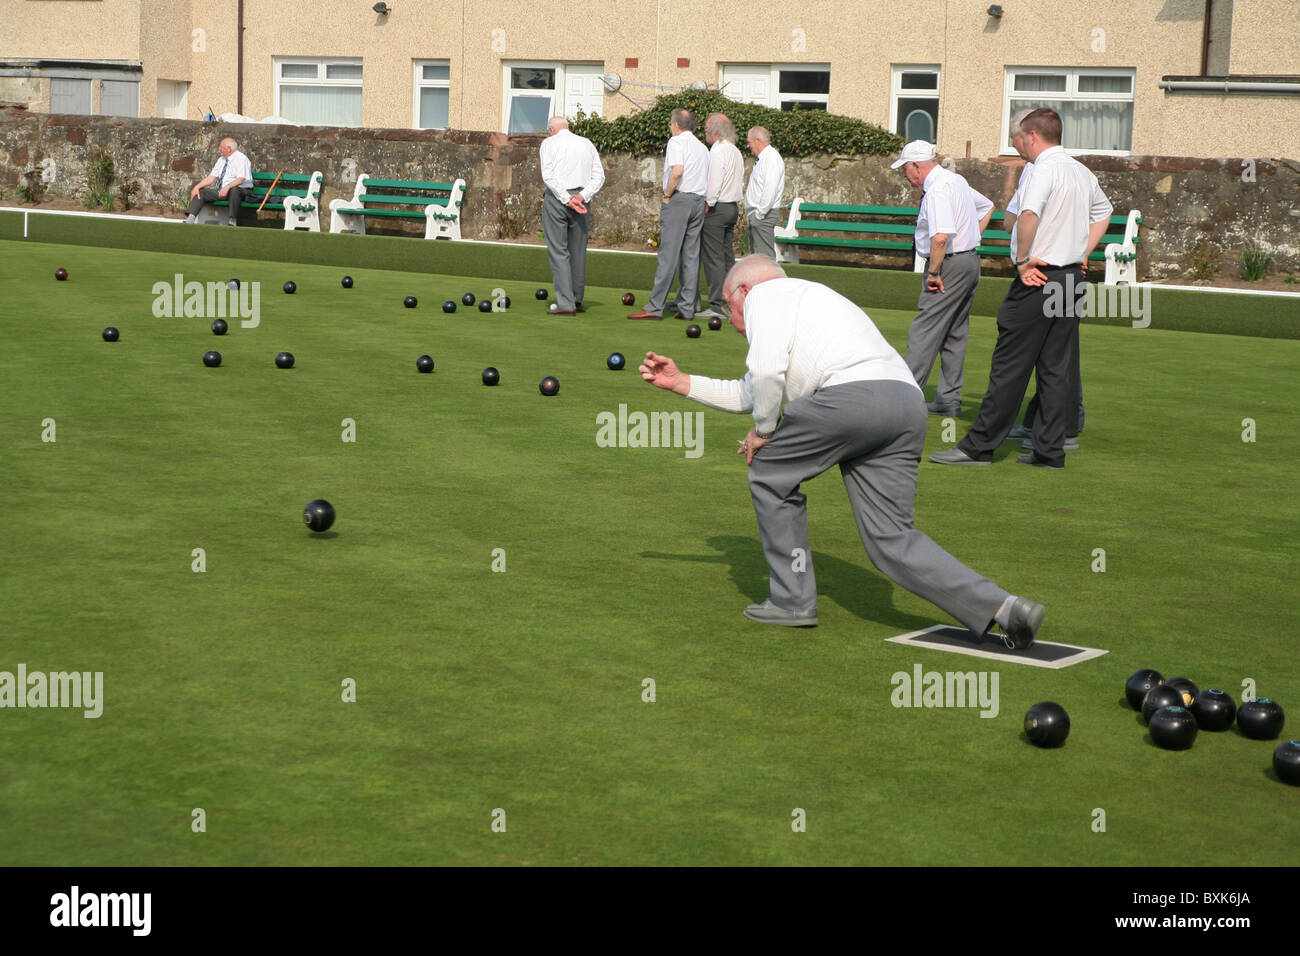 Senior man rolling a bowl during a game of flat lawn bowling. Stock Photo